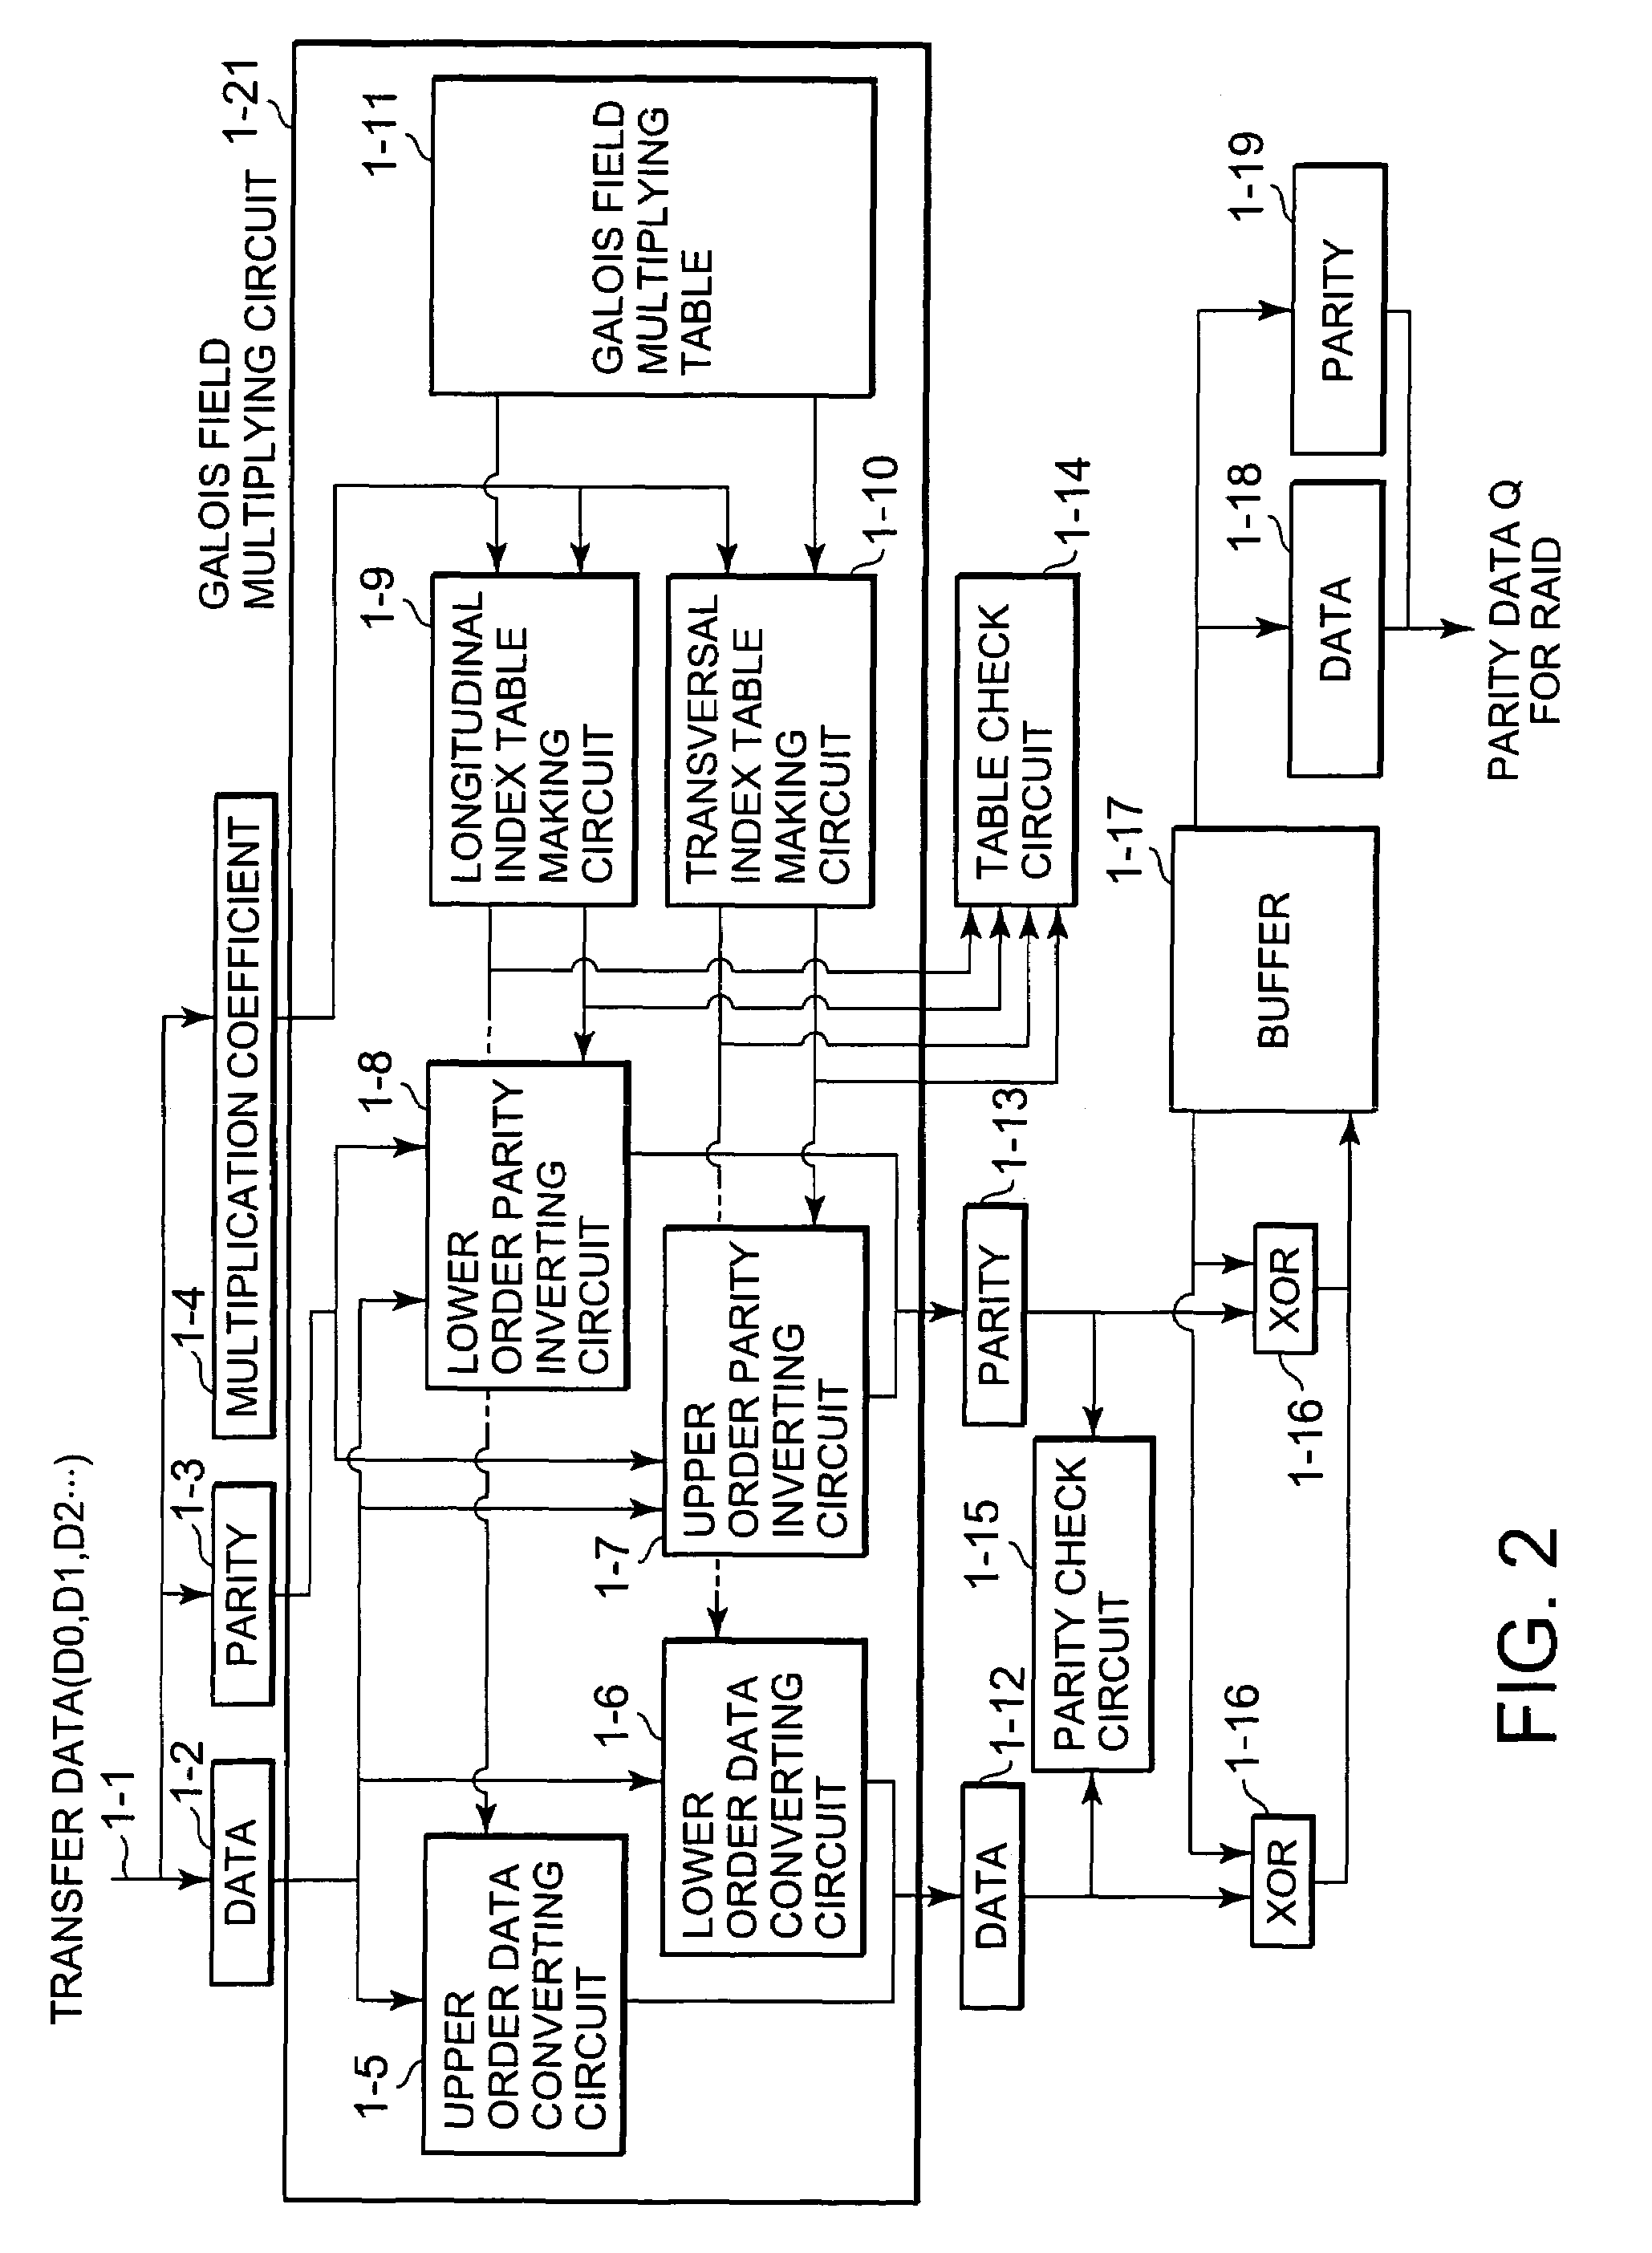 Disk array device, parity data generating circuit for RAID and Galois field multiplying circuit